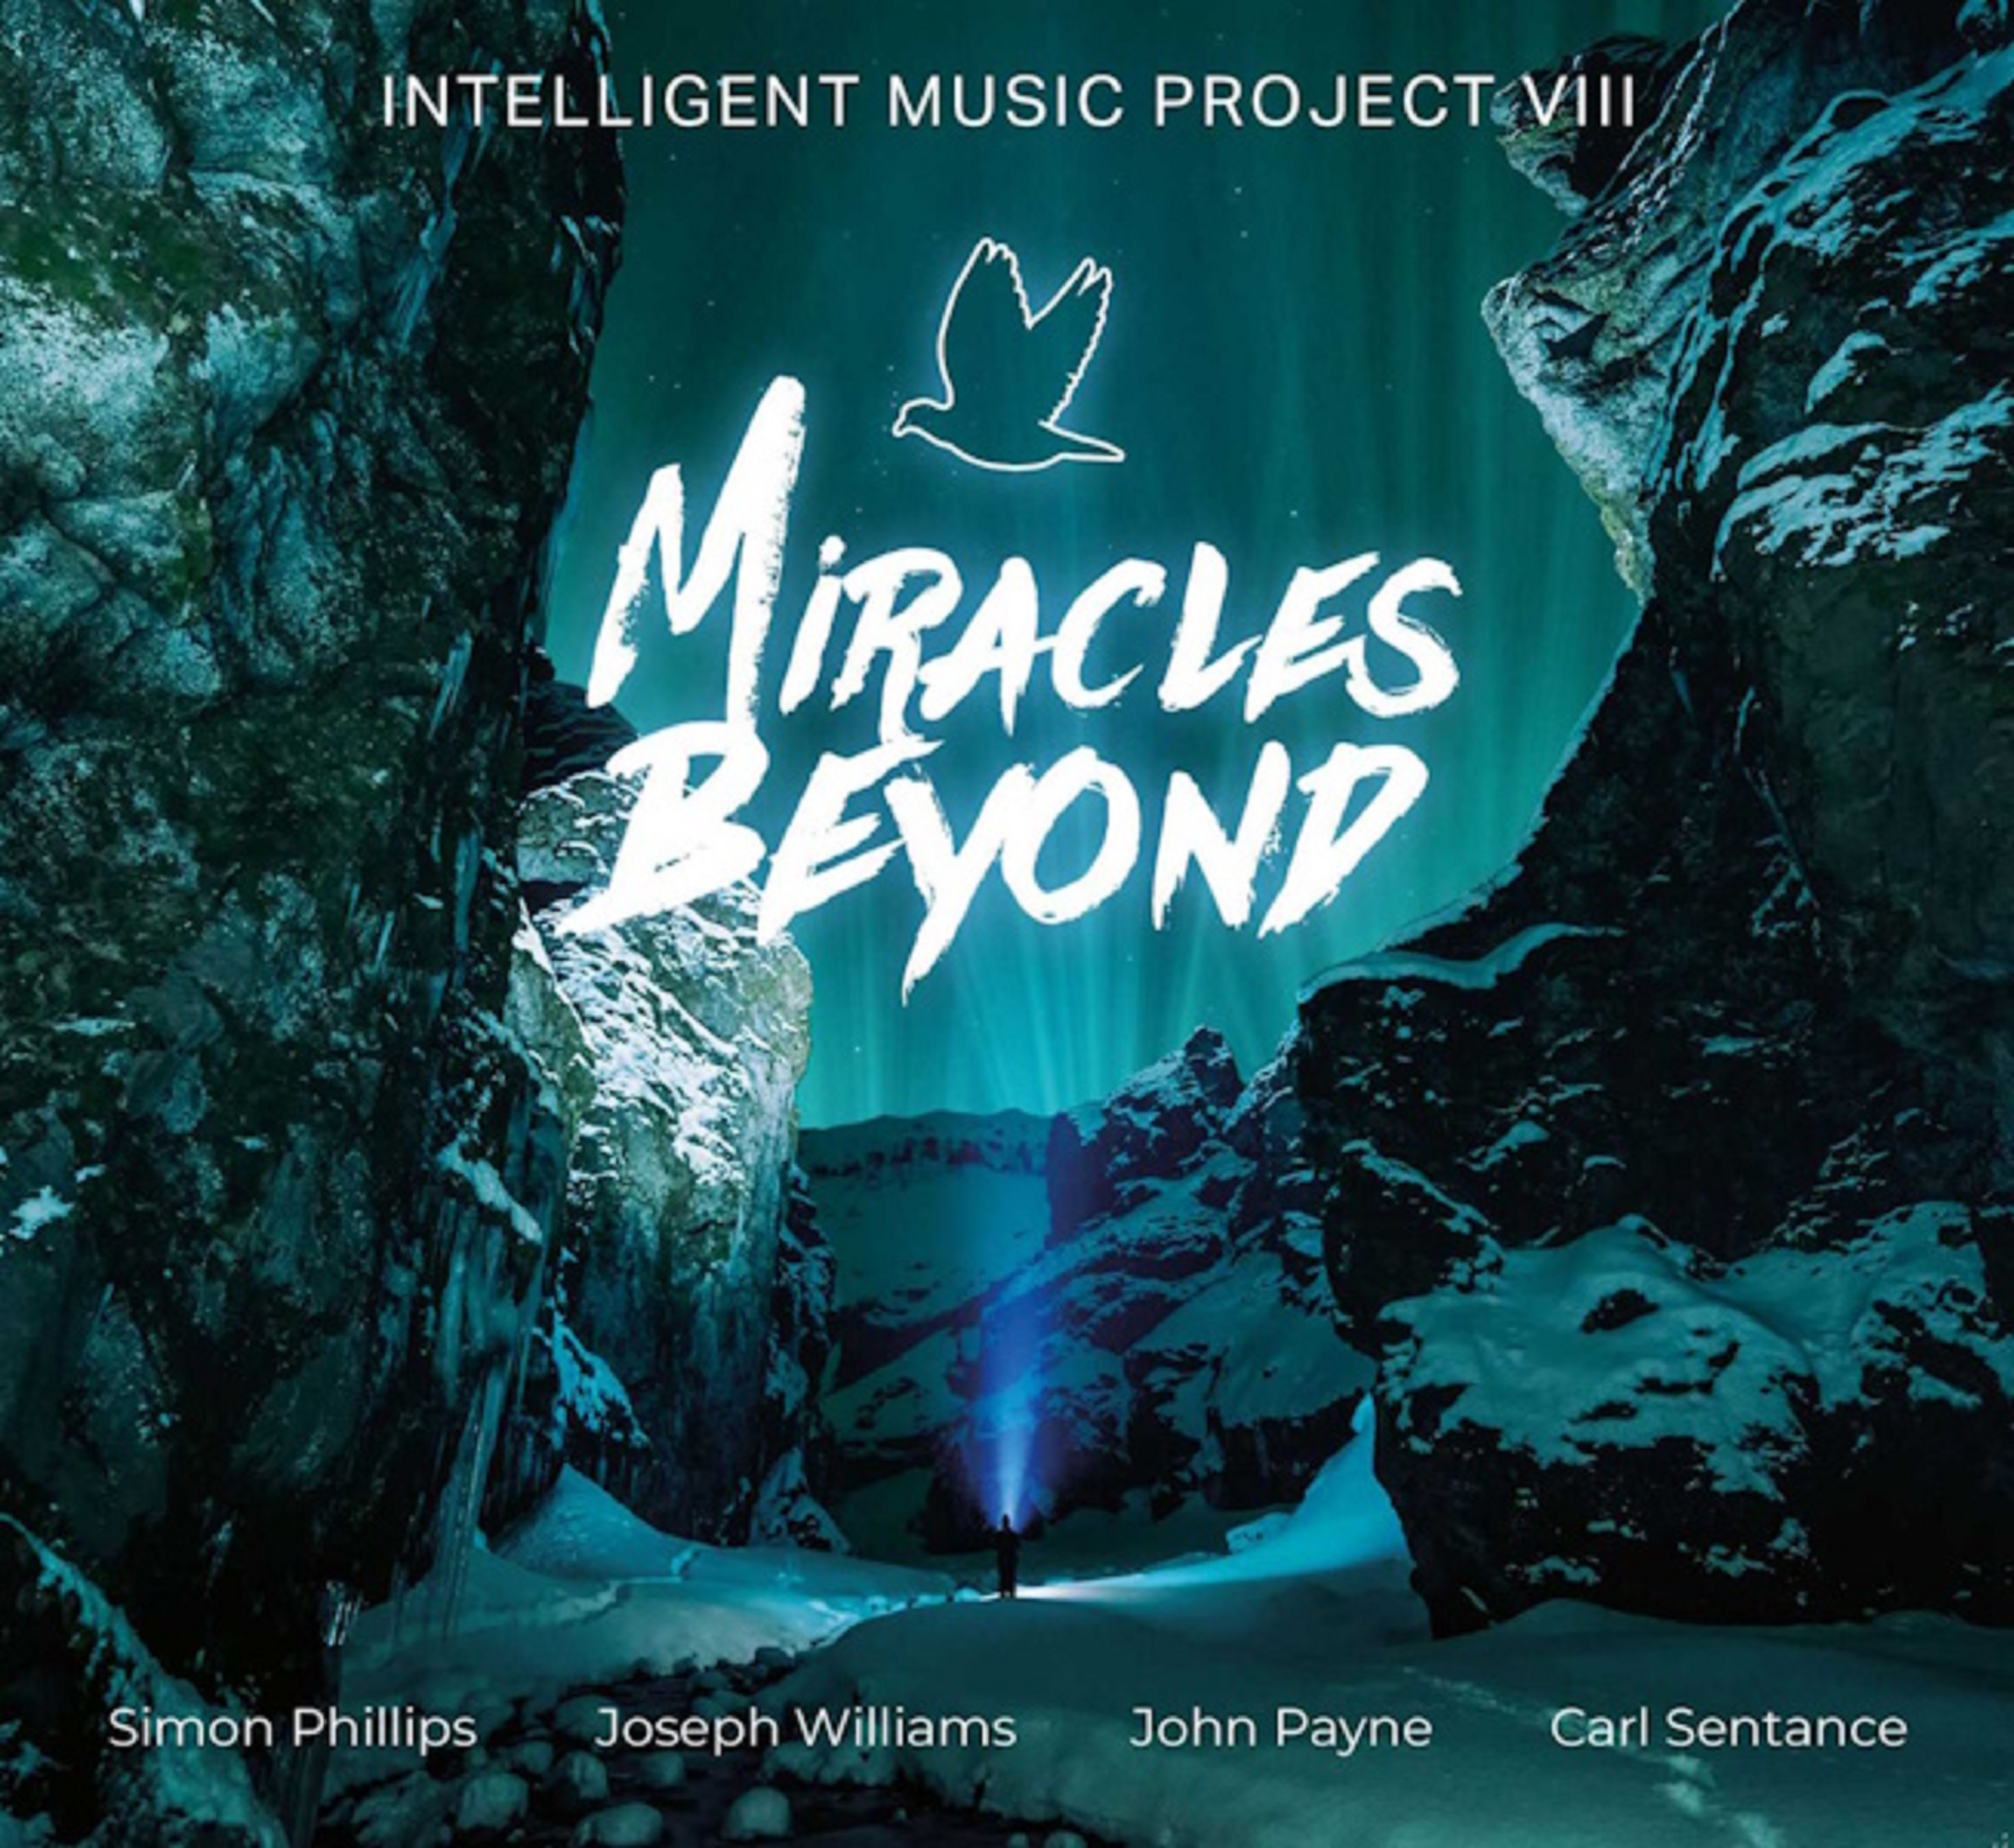 Intelligent Music Project Featuring Joseph Williams, Simon Phillips, Carl Sentance and John Payne To Release Highly Anticipated Eight Album “Miracles Beyond”